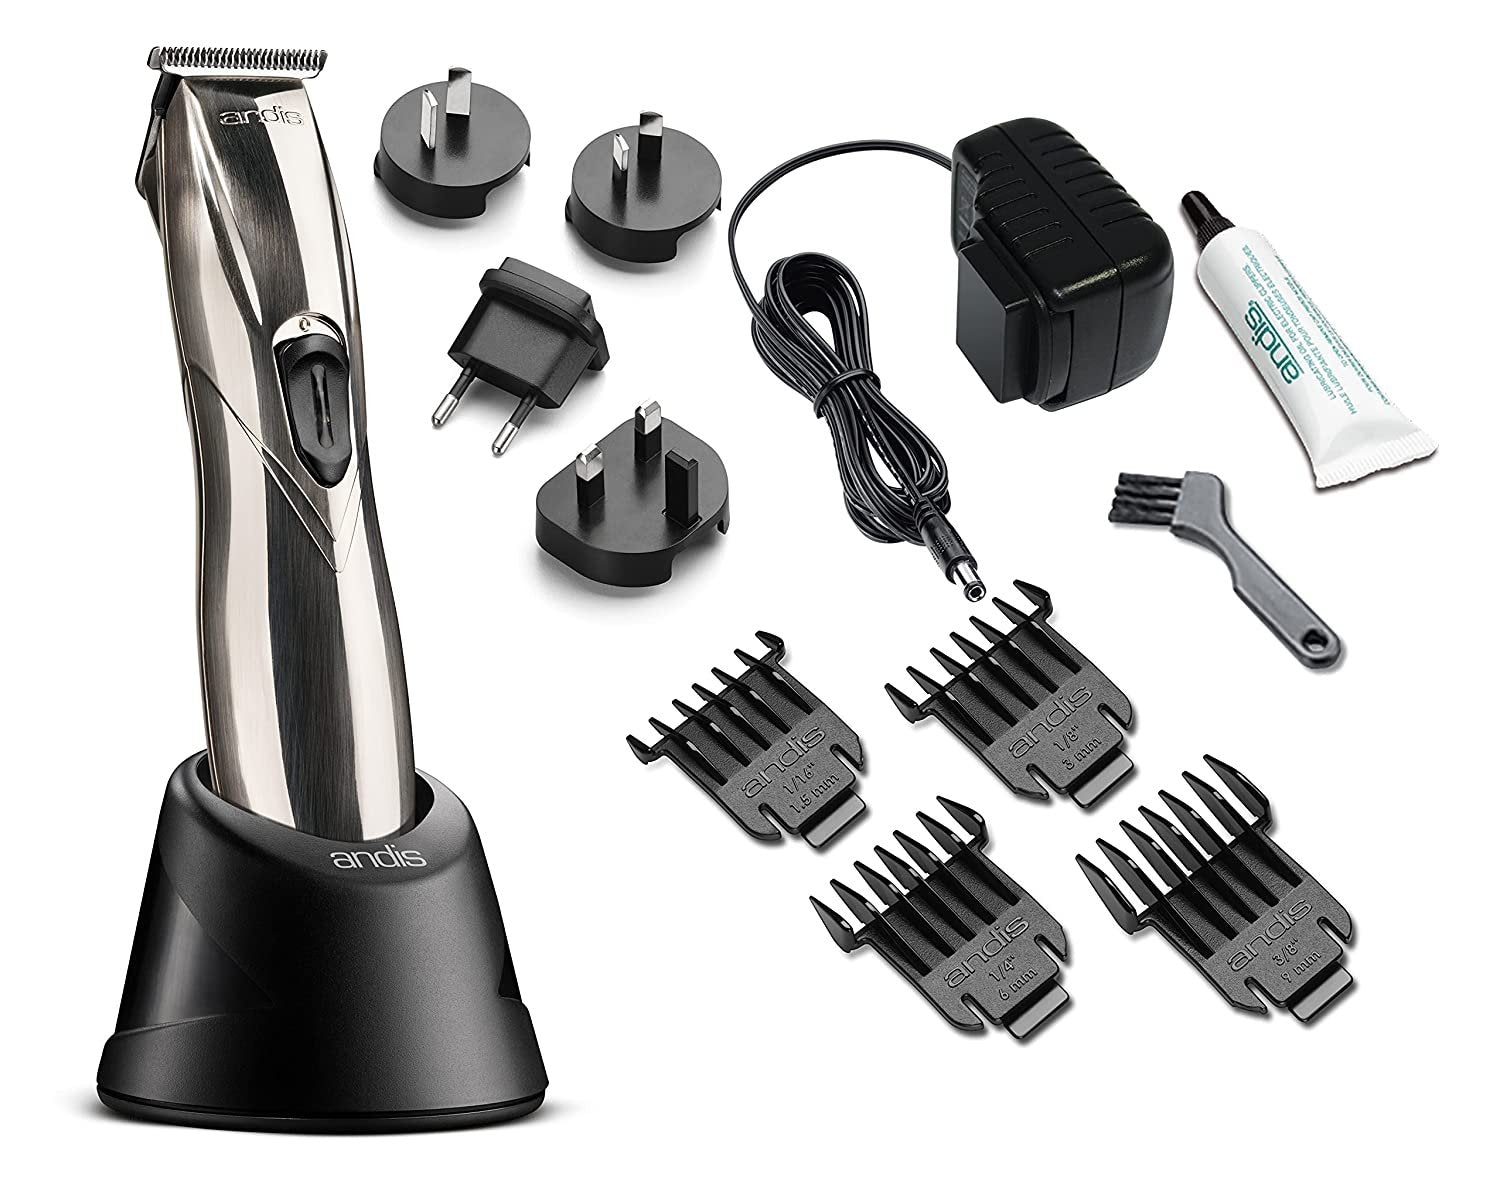 Andis 32400 Slimline Pro Cord/Cordless Beard Trimmer, Lithium Ion T-blade Trimmer, Close Cutting T-Blade Zero Gapped, Chrome